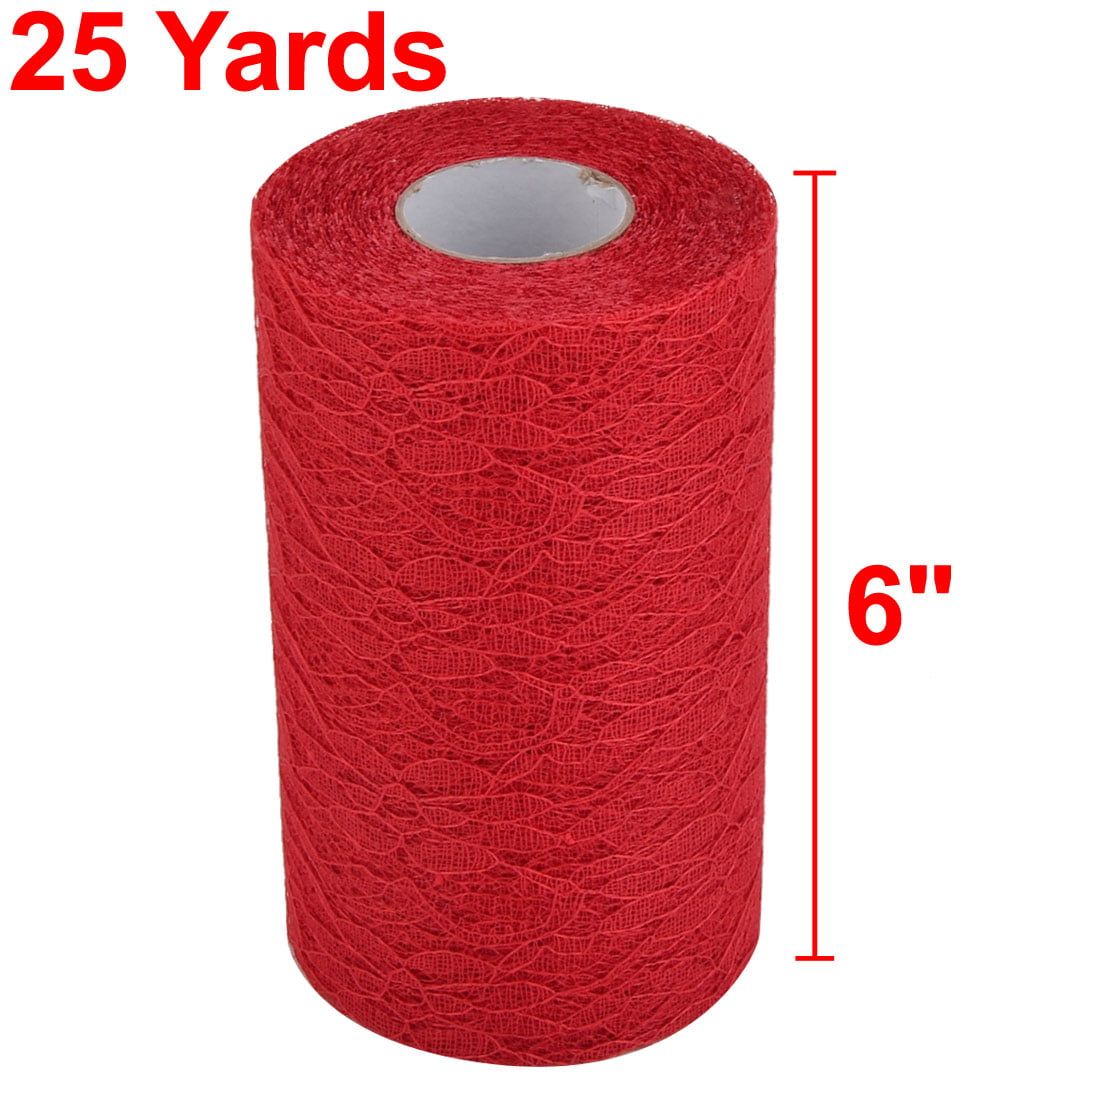 llxieym Christmas Tulle Rolls Tulle Netting Rolls Tulle Fabric Mesh Ribbons for Christmas Decoration Wreaths DIY Craft-6 by 25 Yards (Red, White)